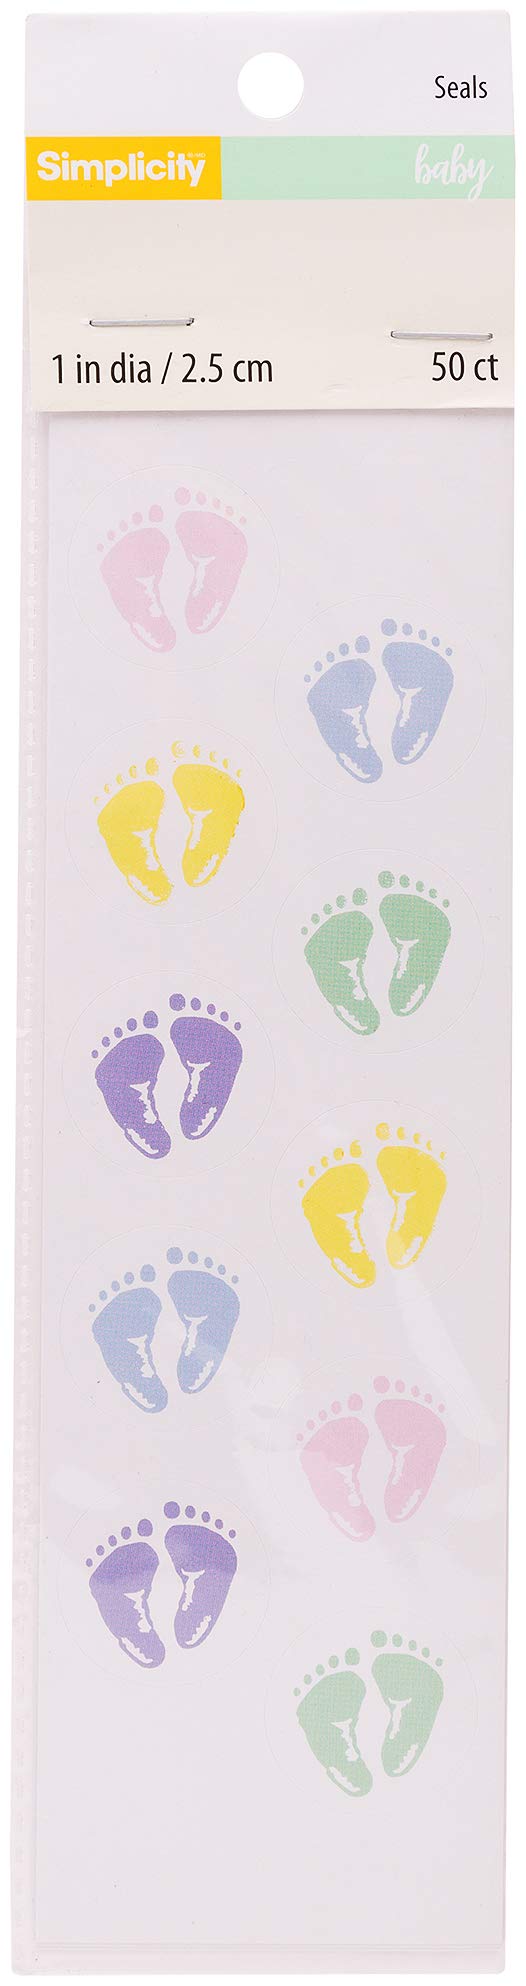 Simplicity Baby Feet Envelope Seal Stickers for Baby Shower Invitations, 50pc